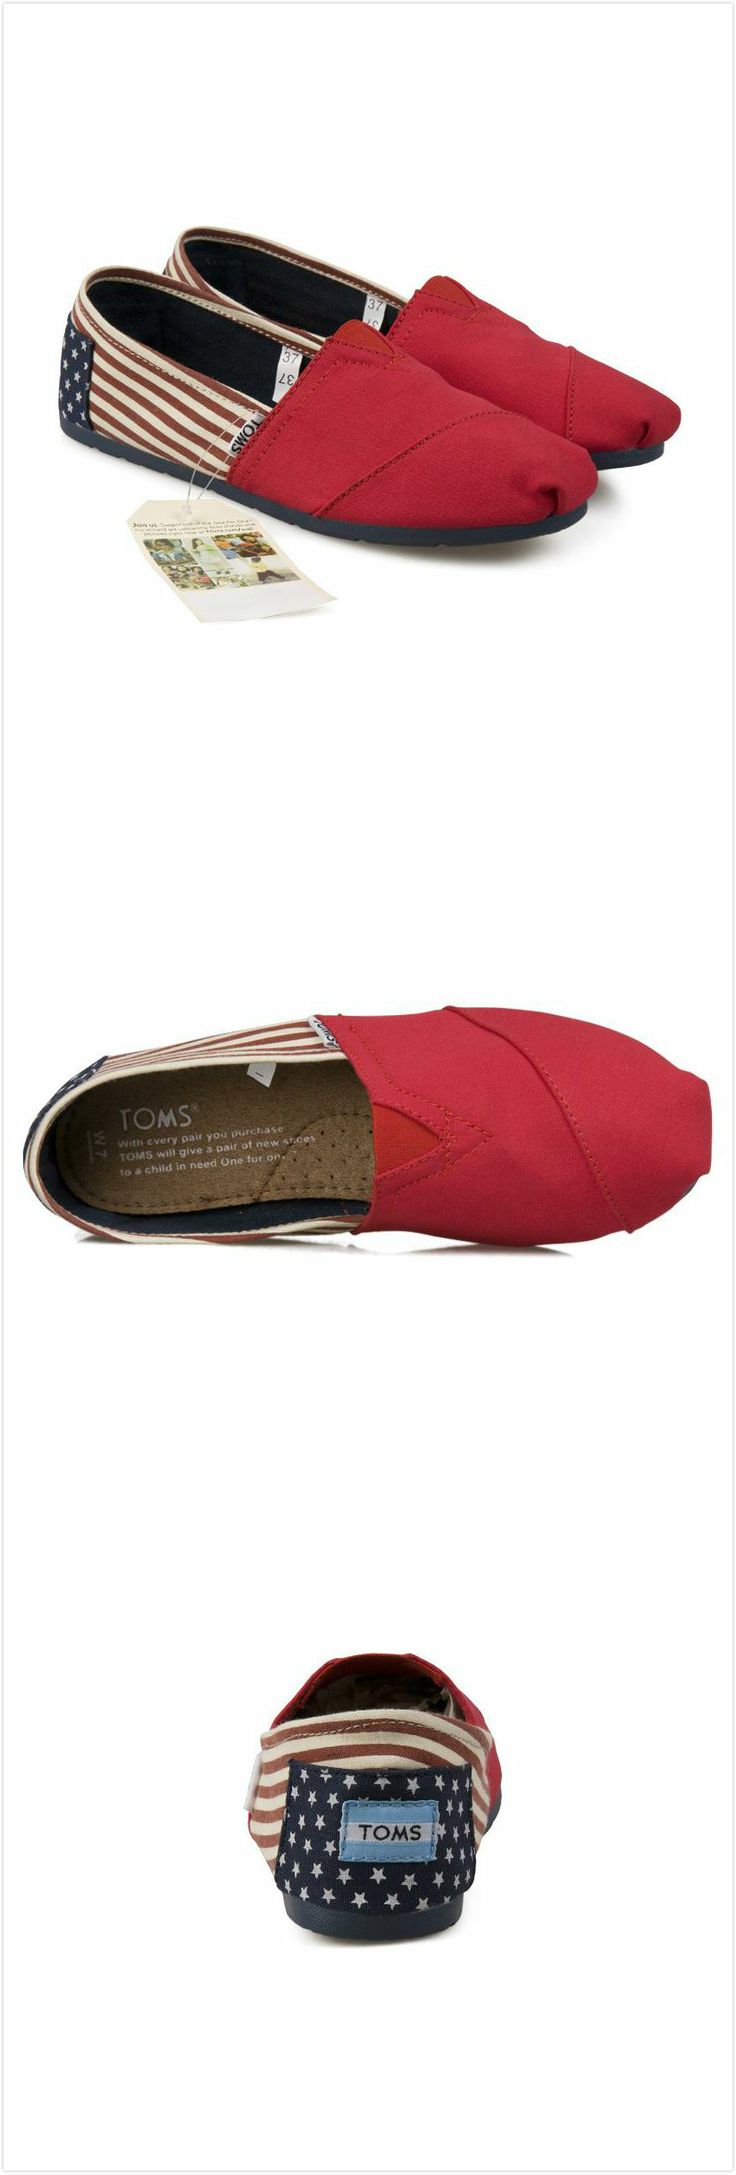 2013 Best selling Toms Shoes!  $16.89! #toms #shoes #fashion...